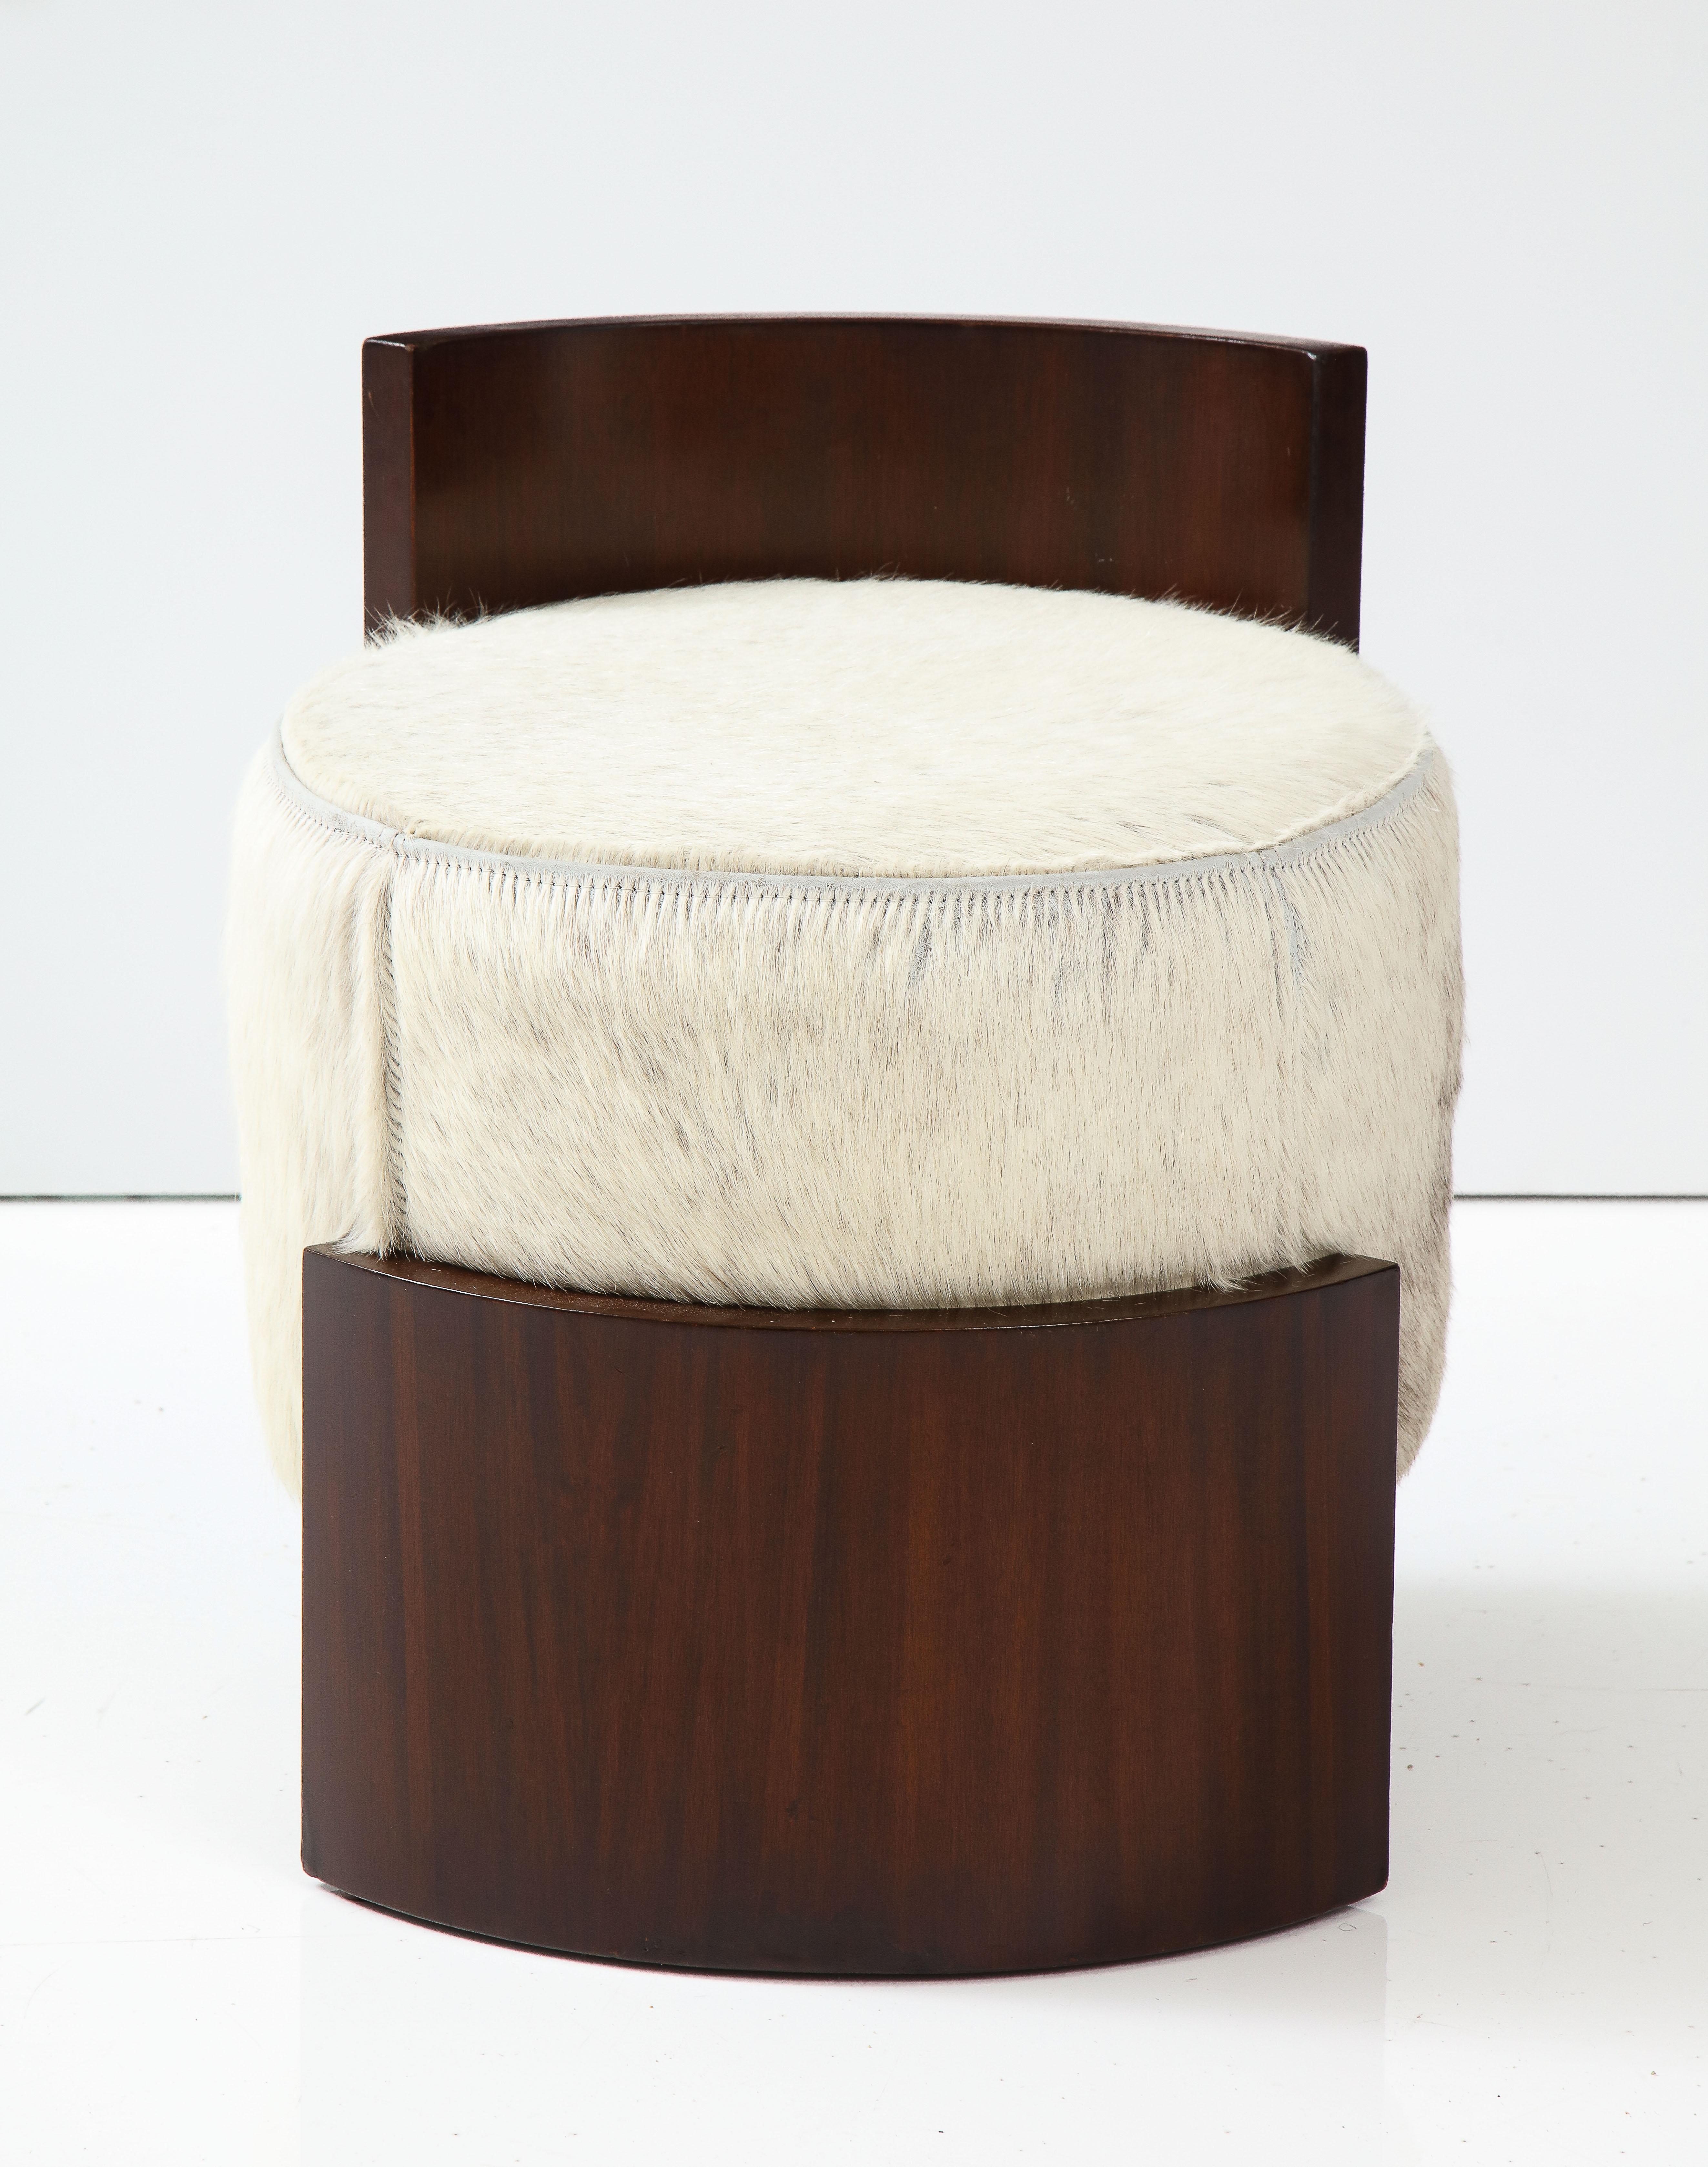 A glamorous French Art Deco mahogany stool with elegant backrest; with original goat skin upholstery.  A simple and streamlined design, with elegant curves which showcase the beauty of the wood.  The goat skin and high polished mahogany were highly